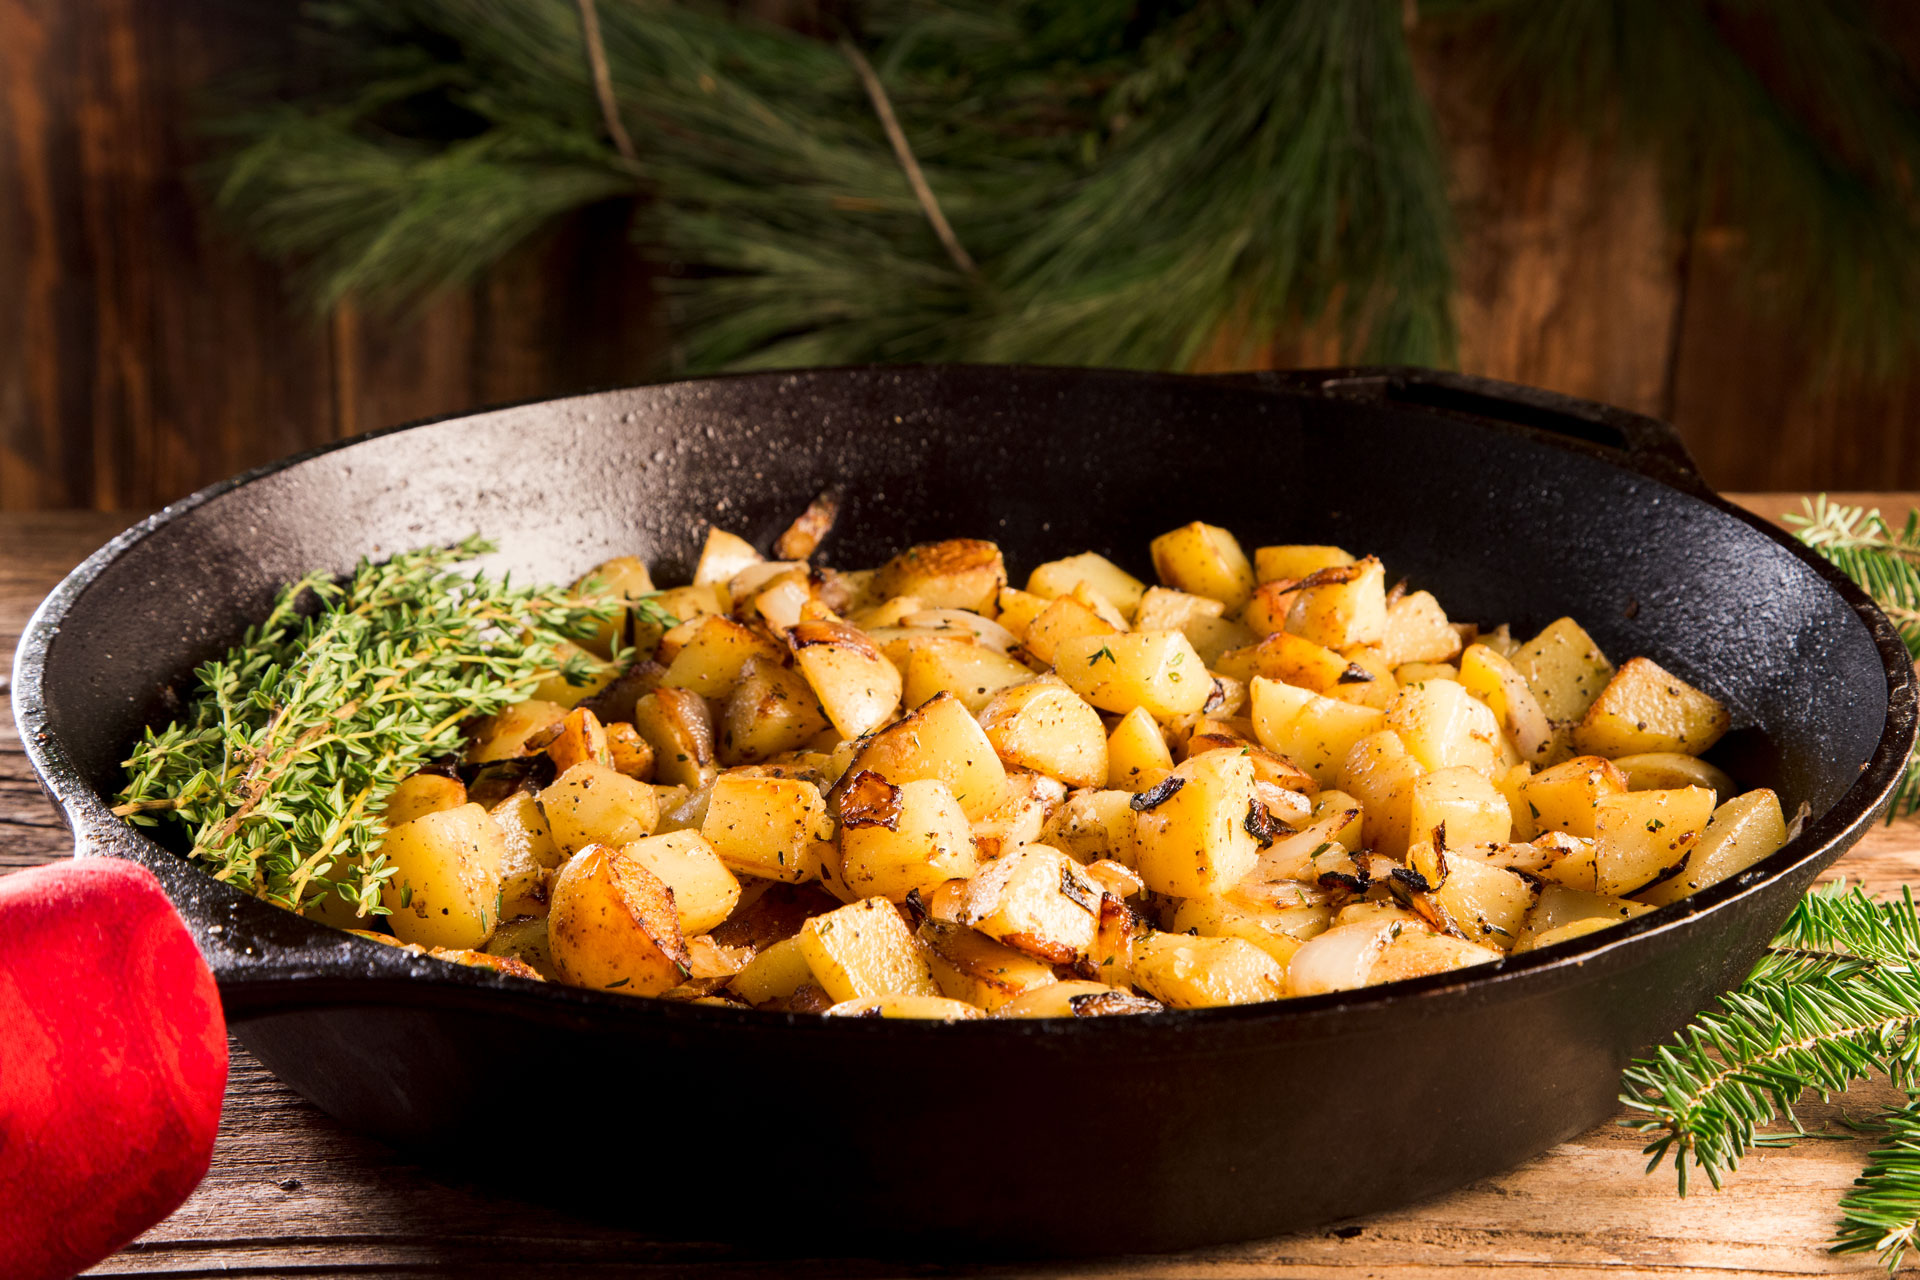 Fried Potatoes and Onions with Thyme are just the difference you need when considering potatoes for the holidays. This goes perfectly with a ham dinner, and is a beautiful skillet dish. For leftovers, if there are any, throw in some of your ham and make it a main dish.